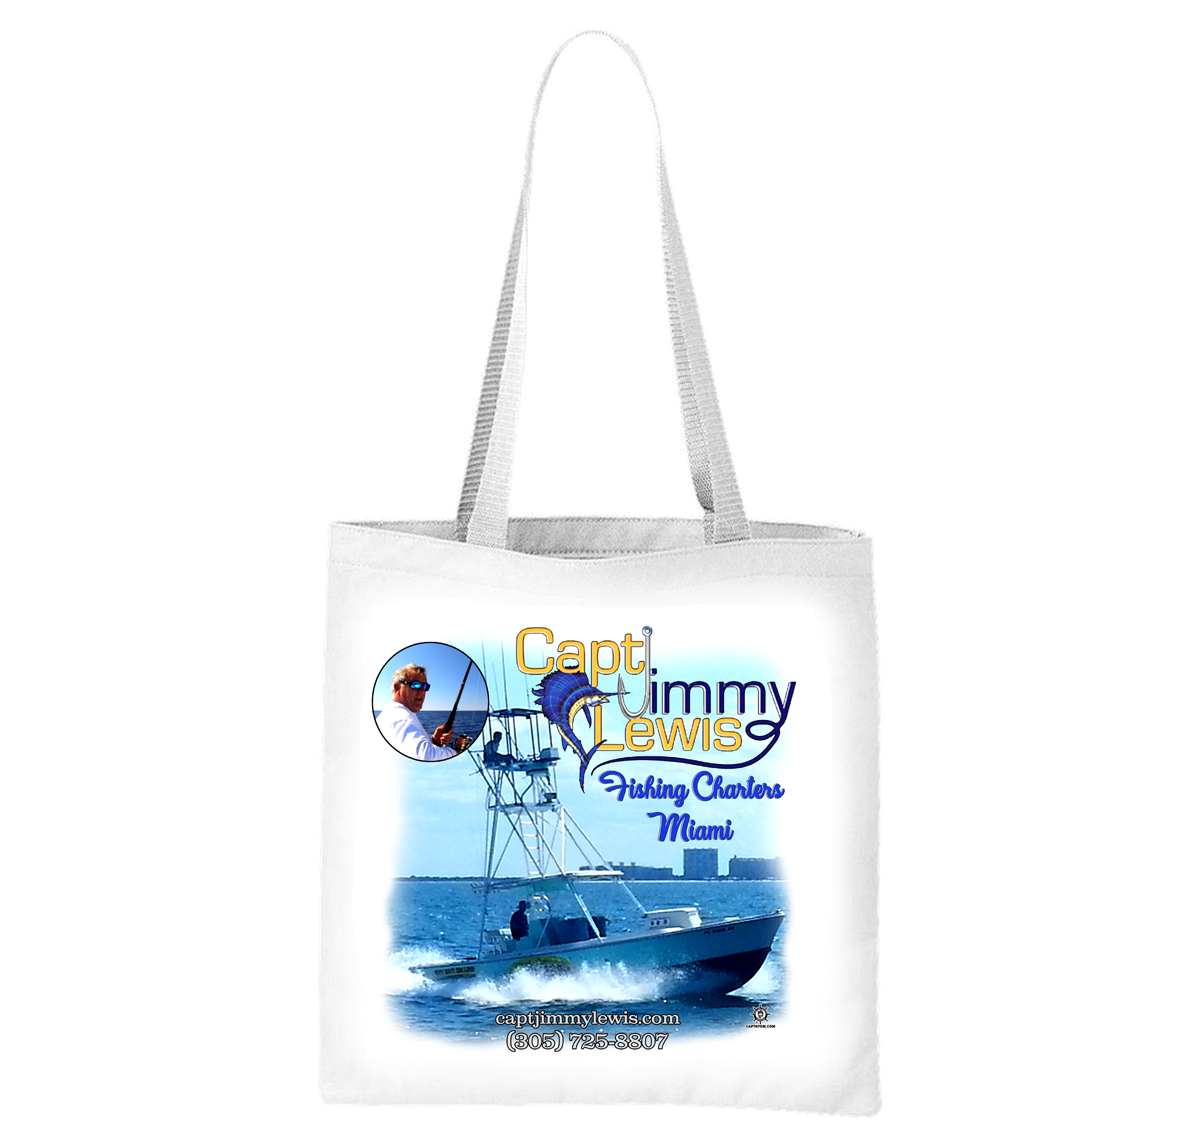 Captain Jimmy Lewis Fishing Charters Liberty Bag